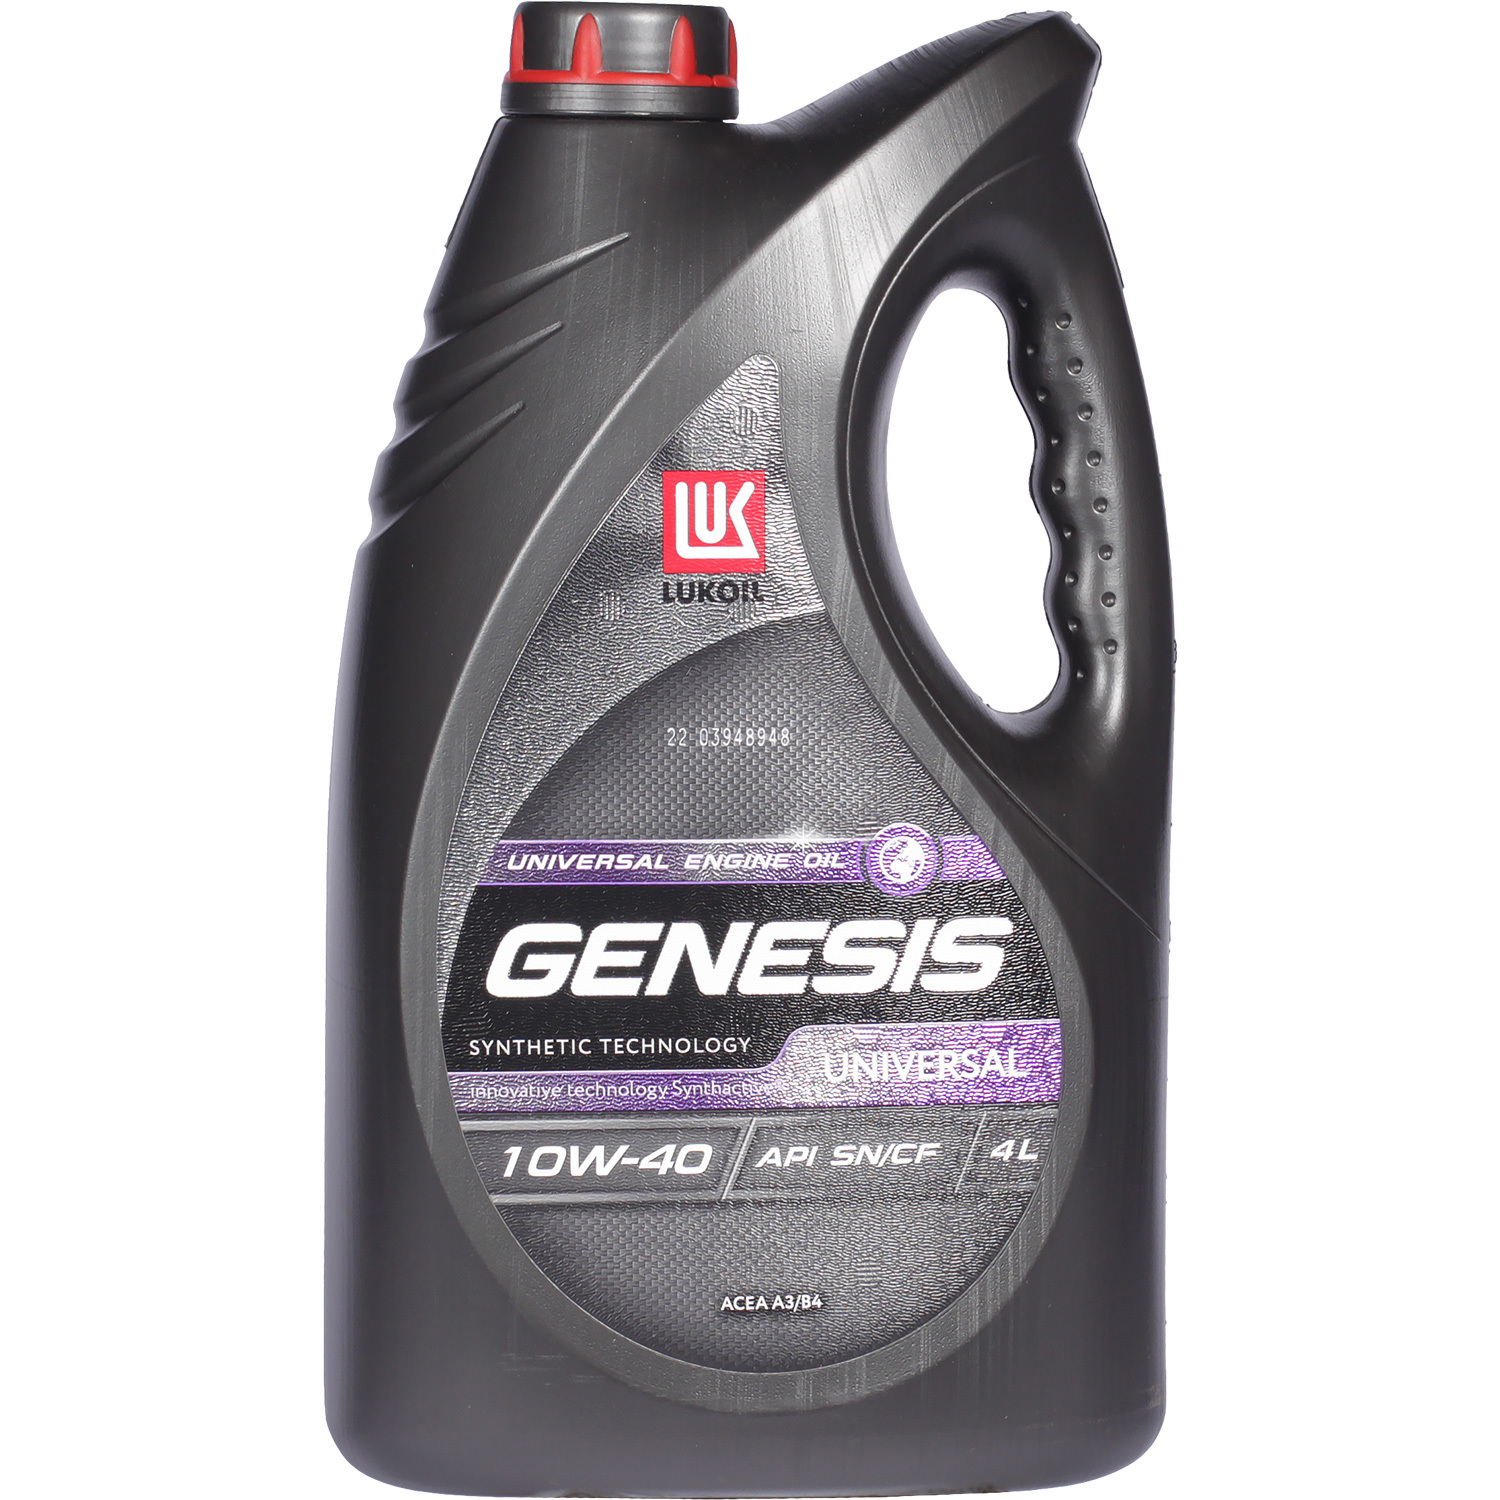 Lukoil Моторное масло Lukoil Genesis Universal 10W-40, 4 л моторное масло лукойл genesis universal 10w 40 4 л 3148646